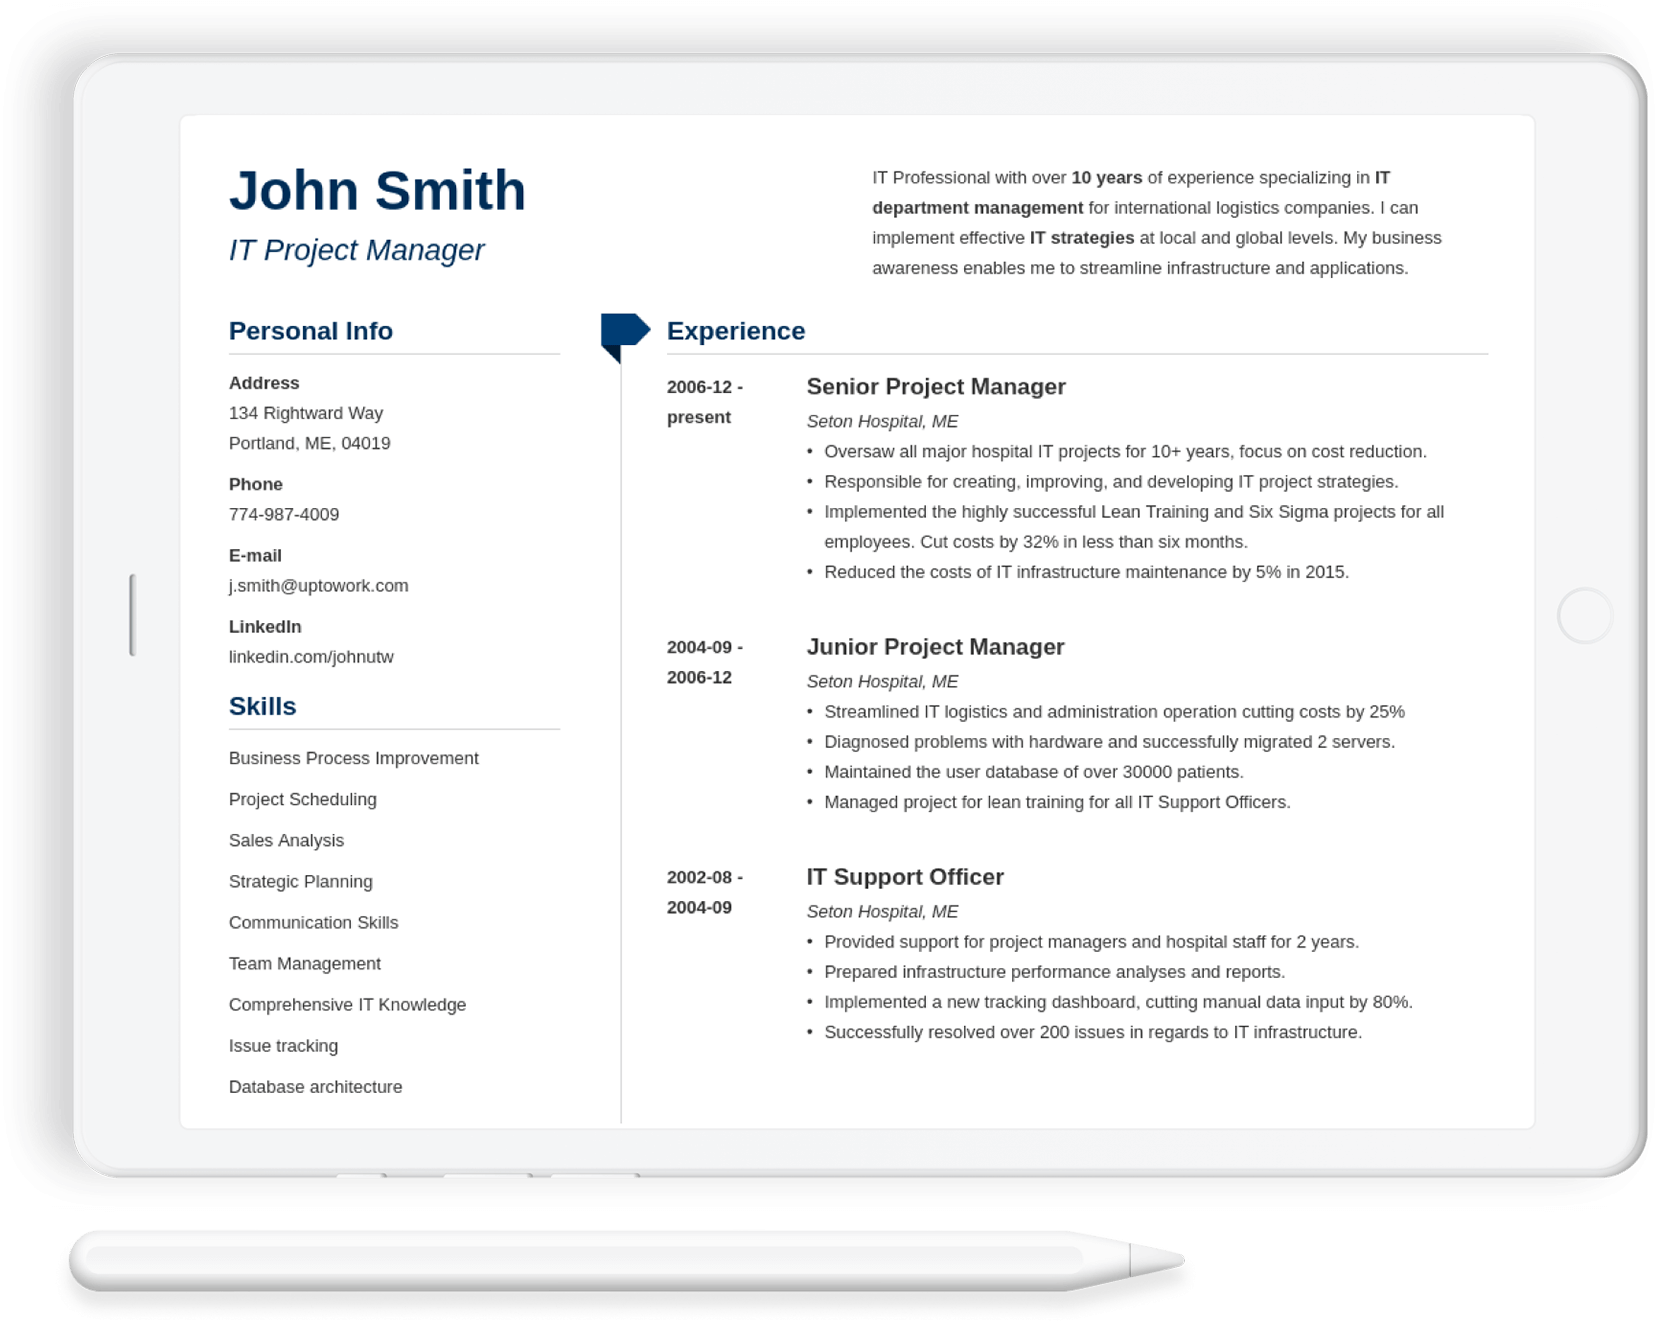 Resume template built with Zety